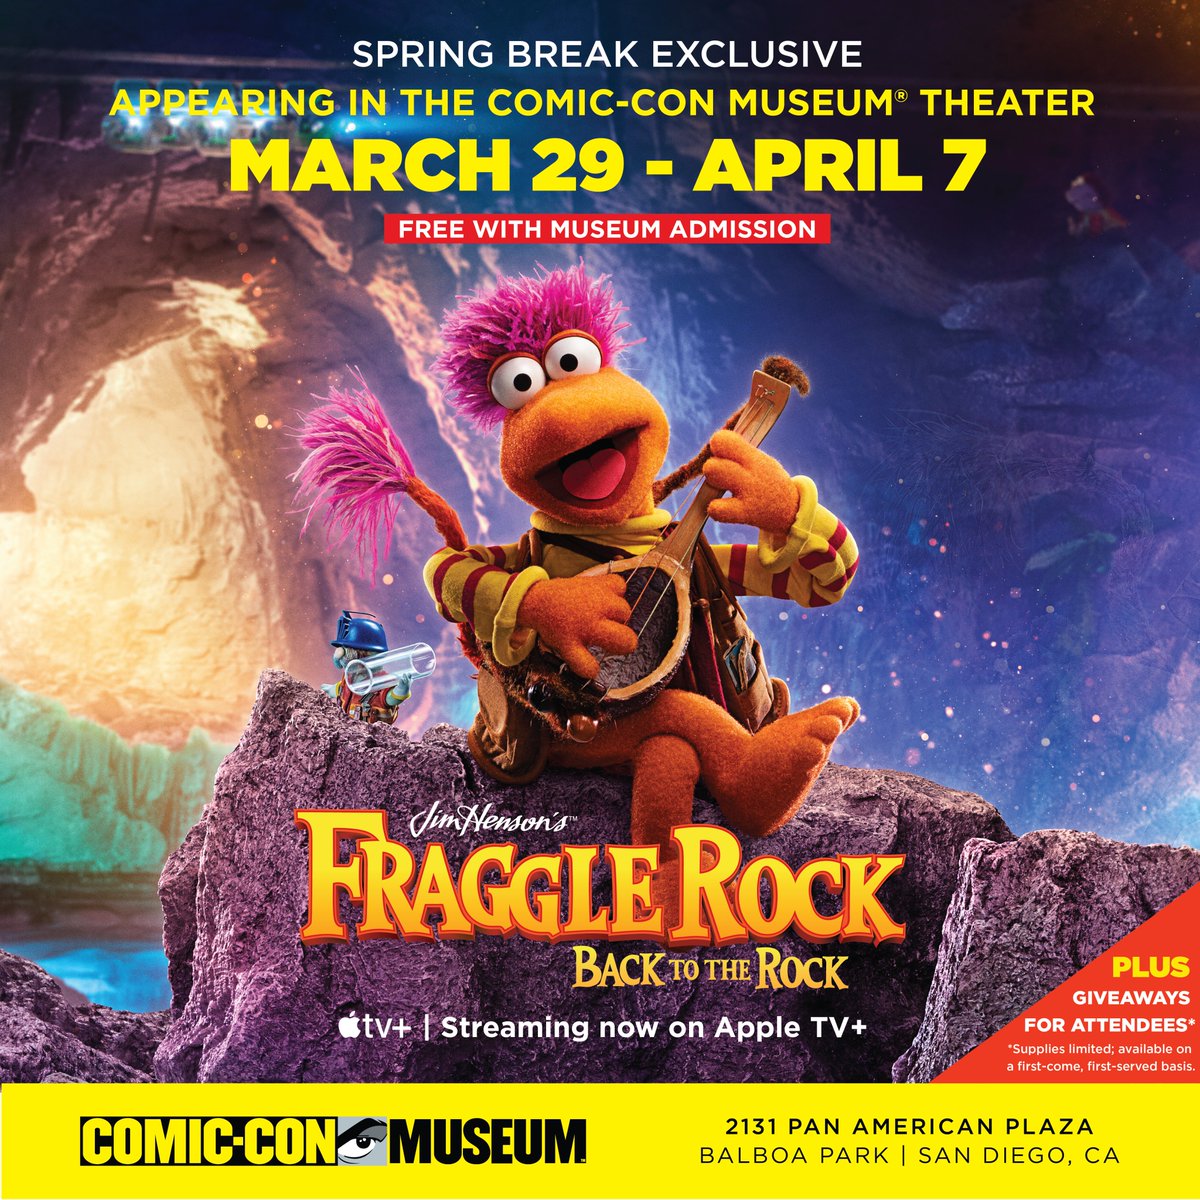 Adventures await the Fraggles! Let’s start the adventure together. Join us for episodes 1 & 2 of #FraggleRock: Back to the Rock, Season 2, on @AppleTV in the theater this week at 11a, 1p & 3p daily (sched subj to change). Free w/ Museum admission. 🎟️: comic-con.org/museum.